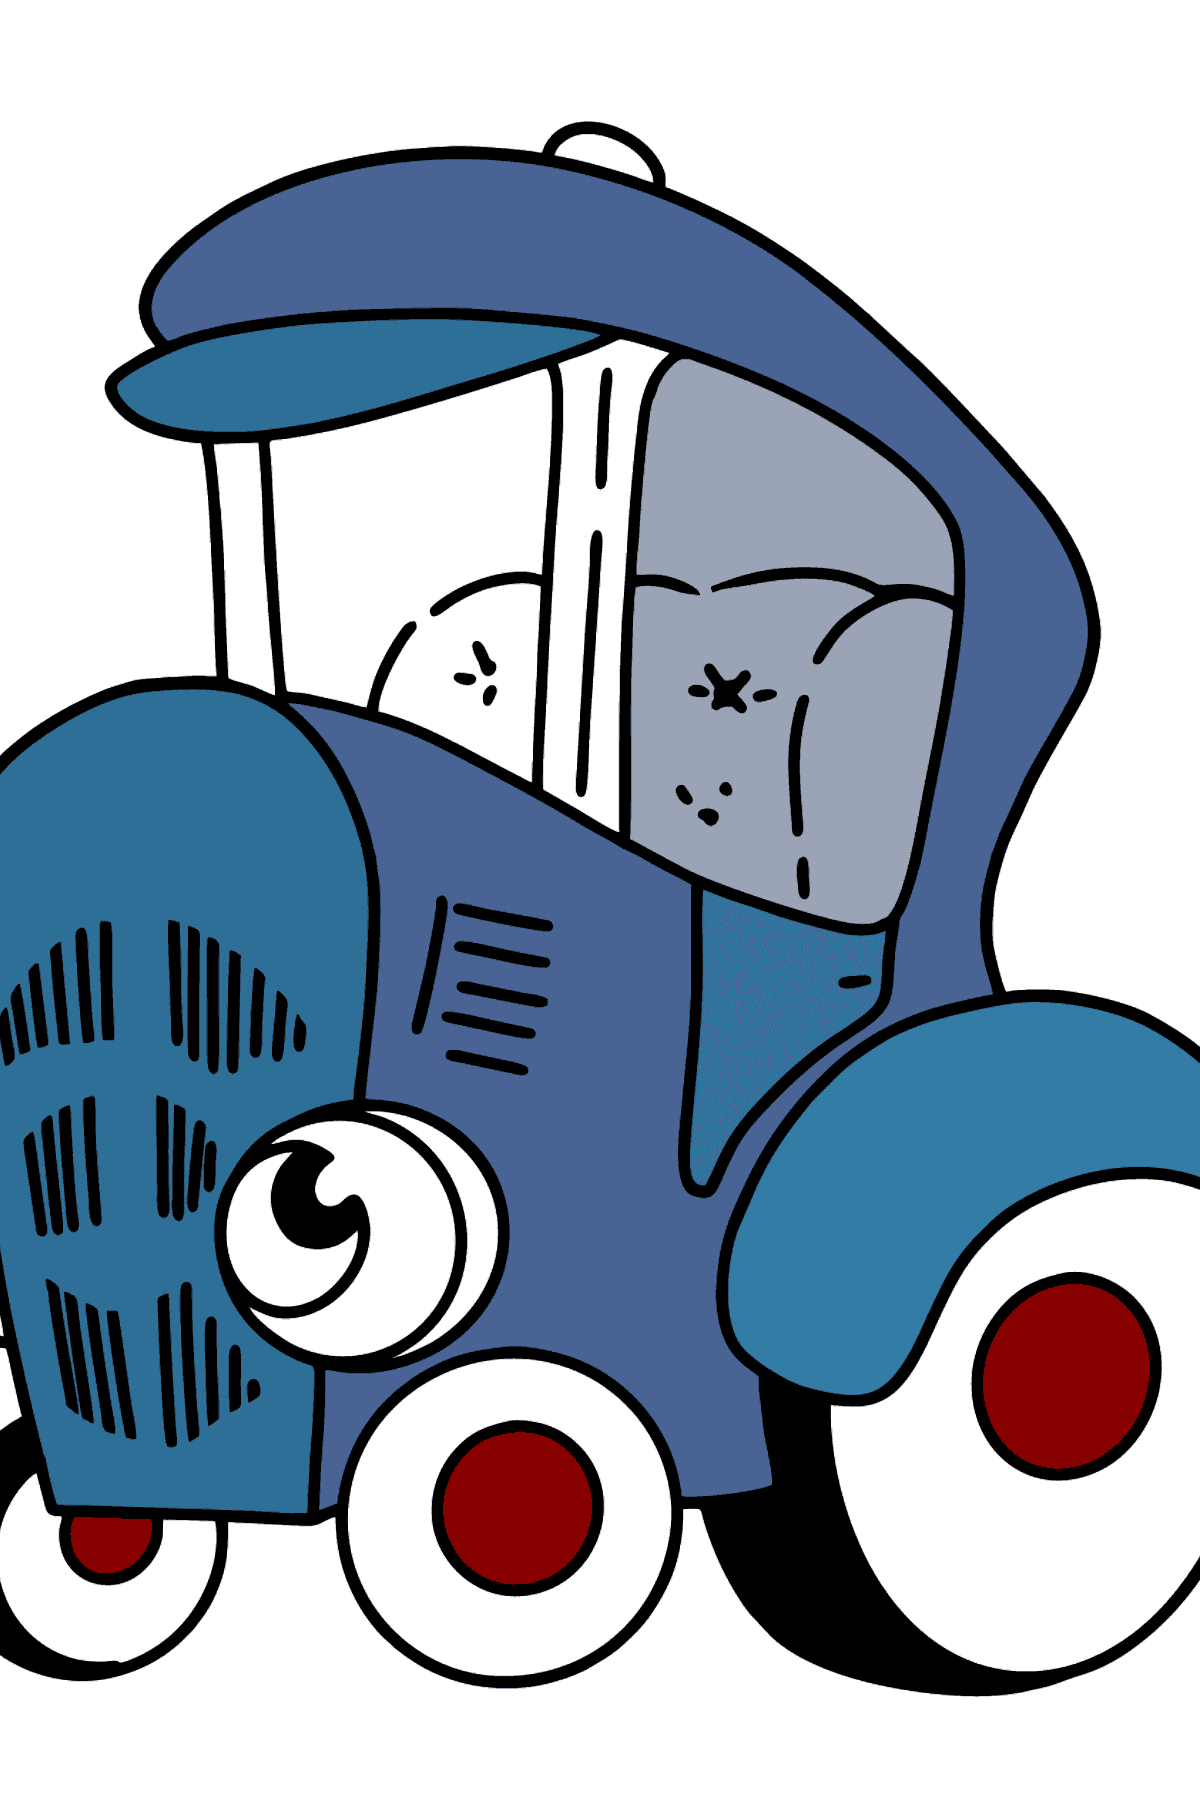 Blue Tractor coloring page - Coloring Pages for Kids